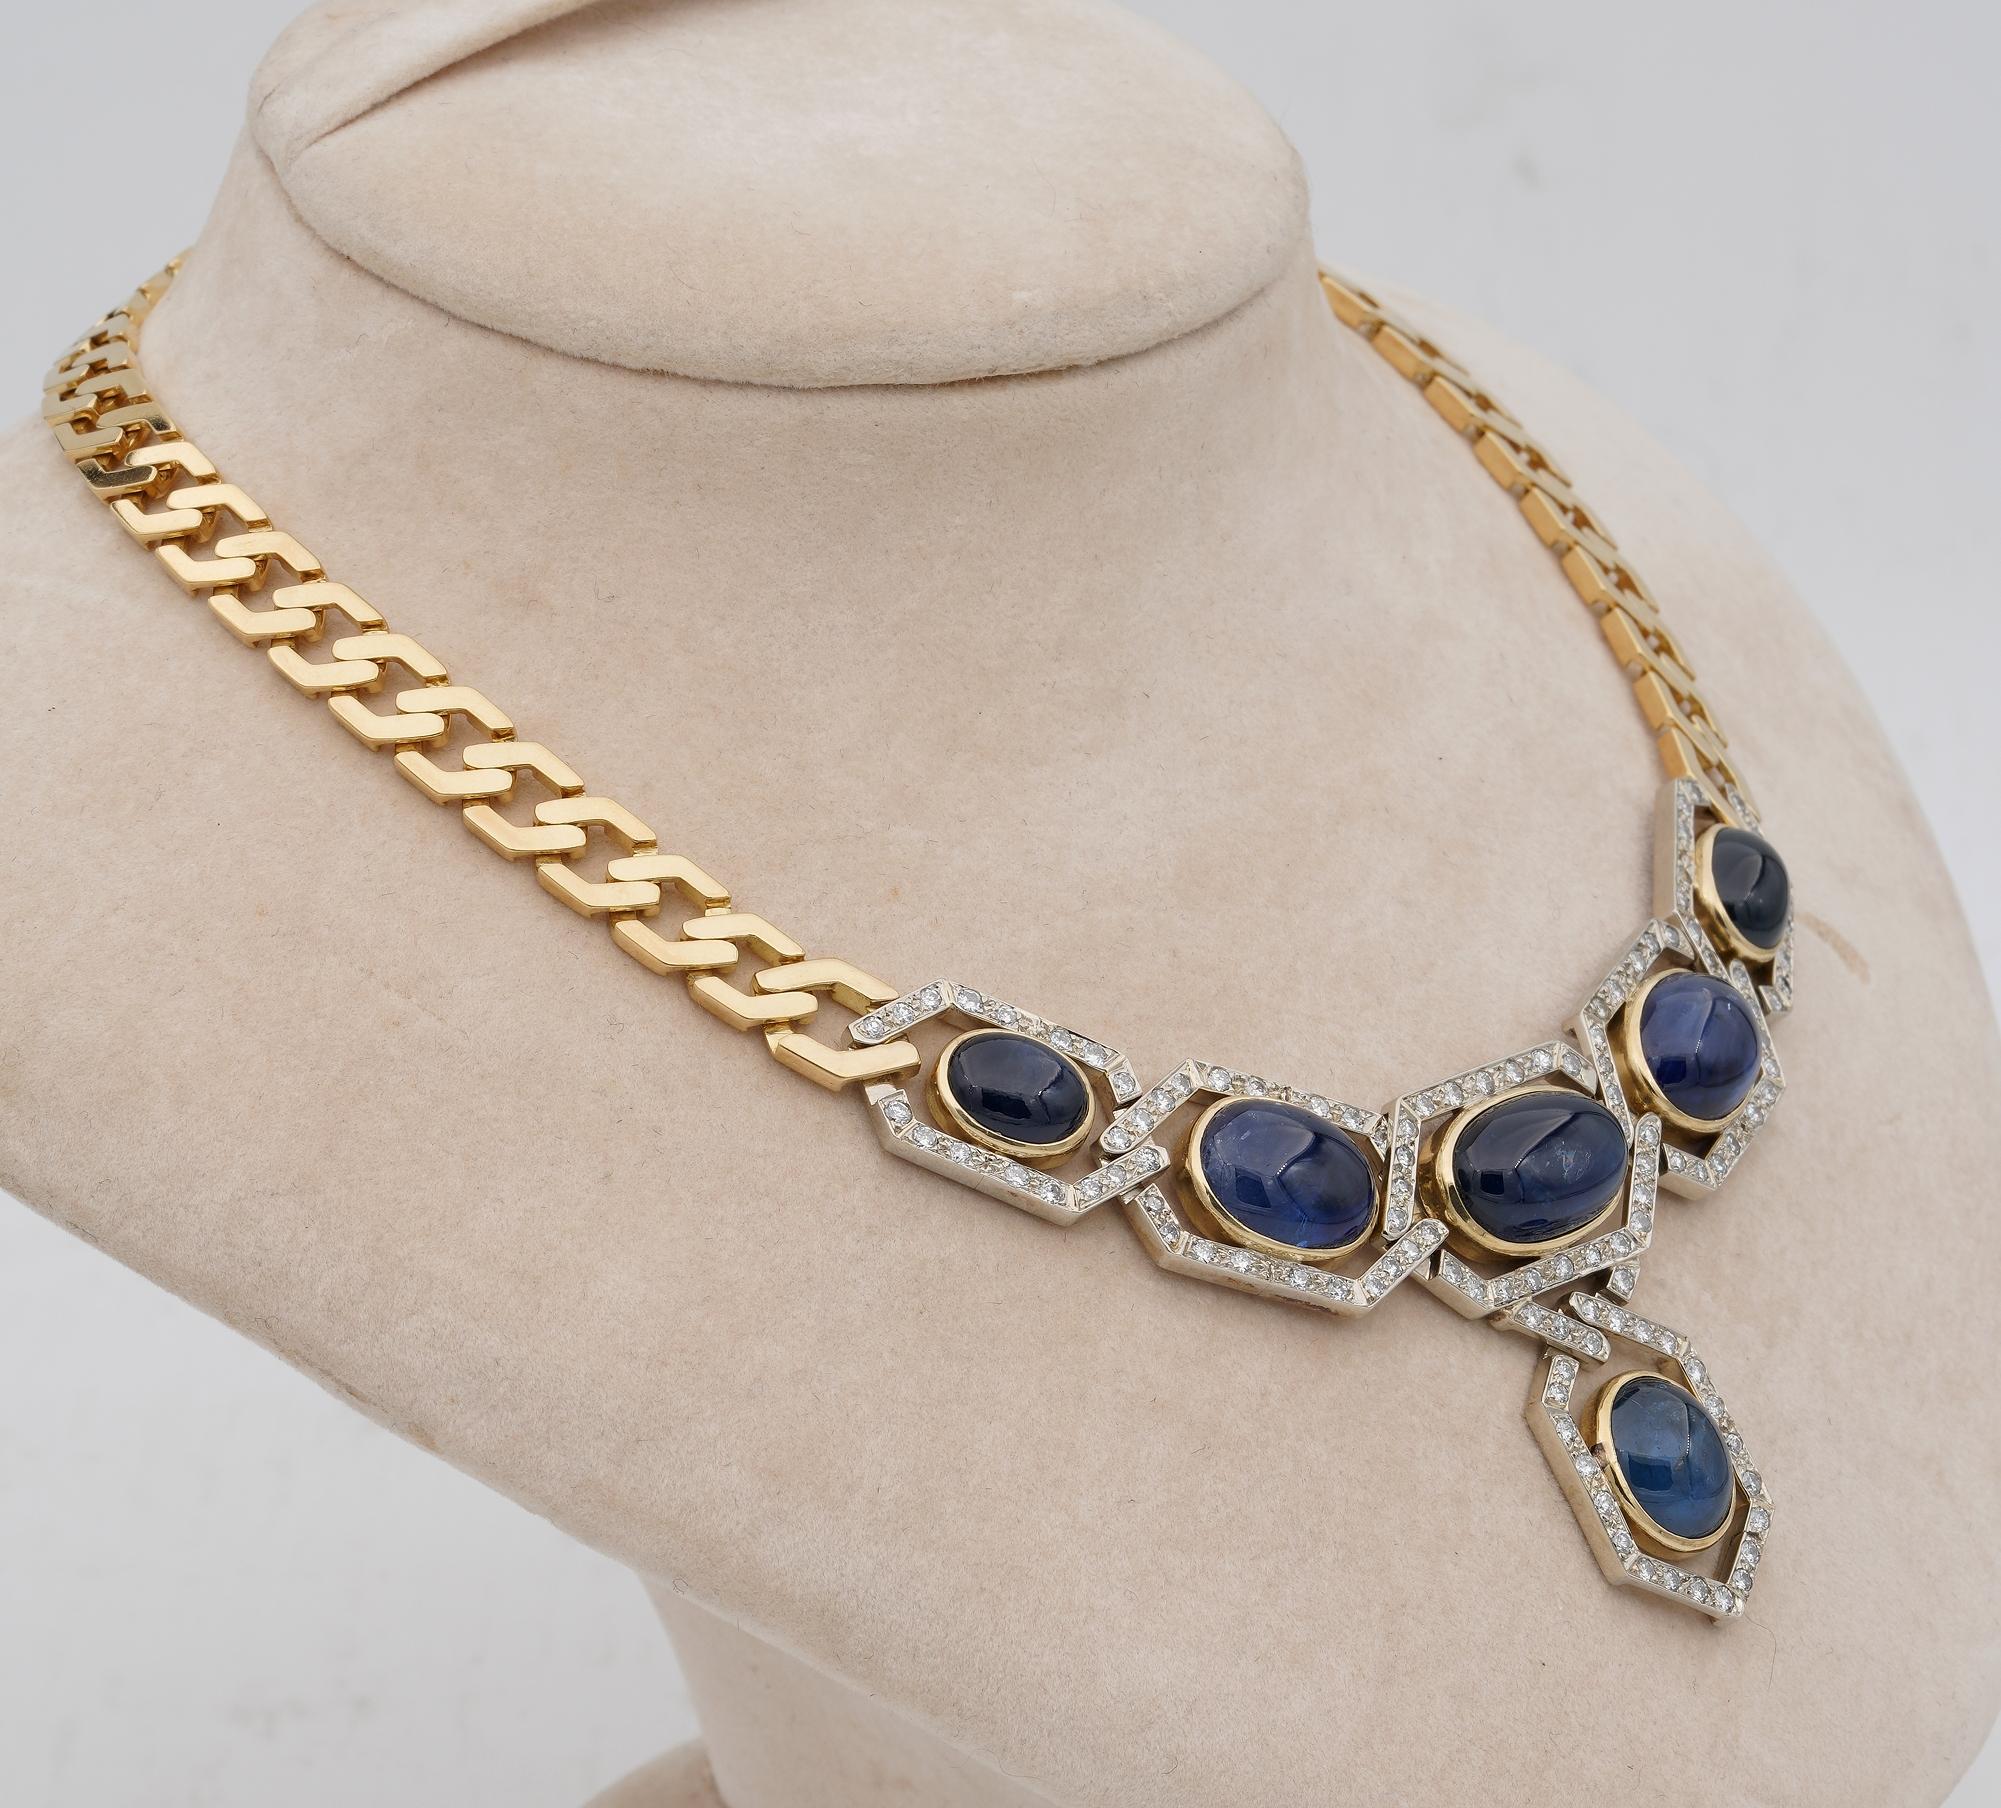 Unique 55.80 Ct Natural Sapphire 15.00 Ct 1970 Curb Necklace 18 KT In Good Condition For Sale In Napoli, IT